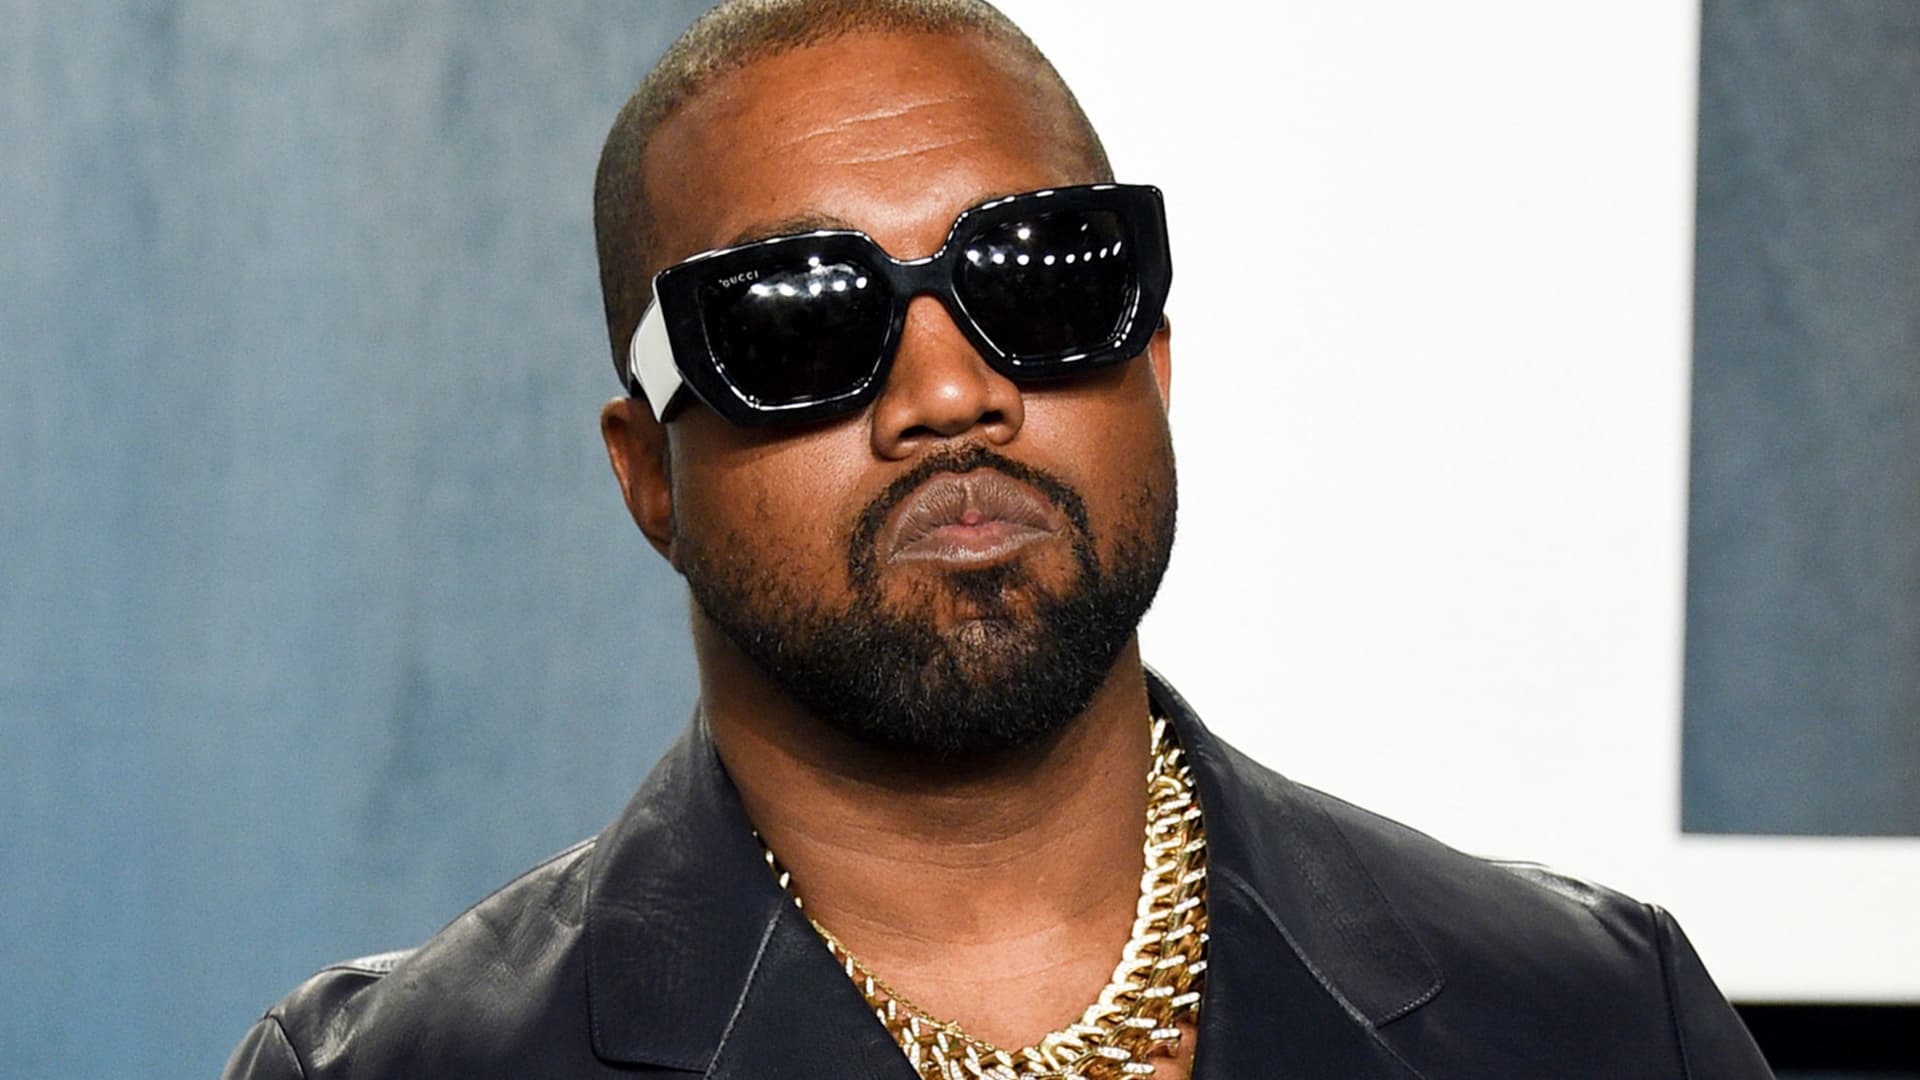 Anti-Defamation League urges Adidas to sever ties with Ye’s Yeezy